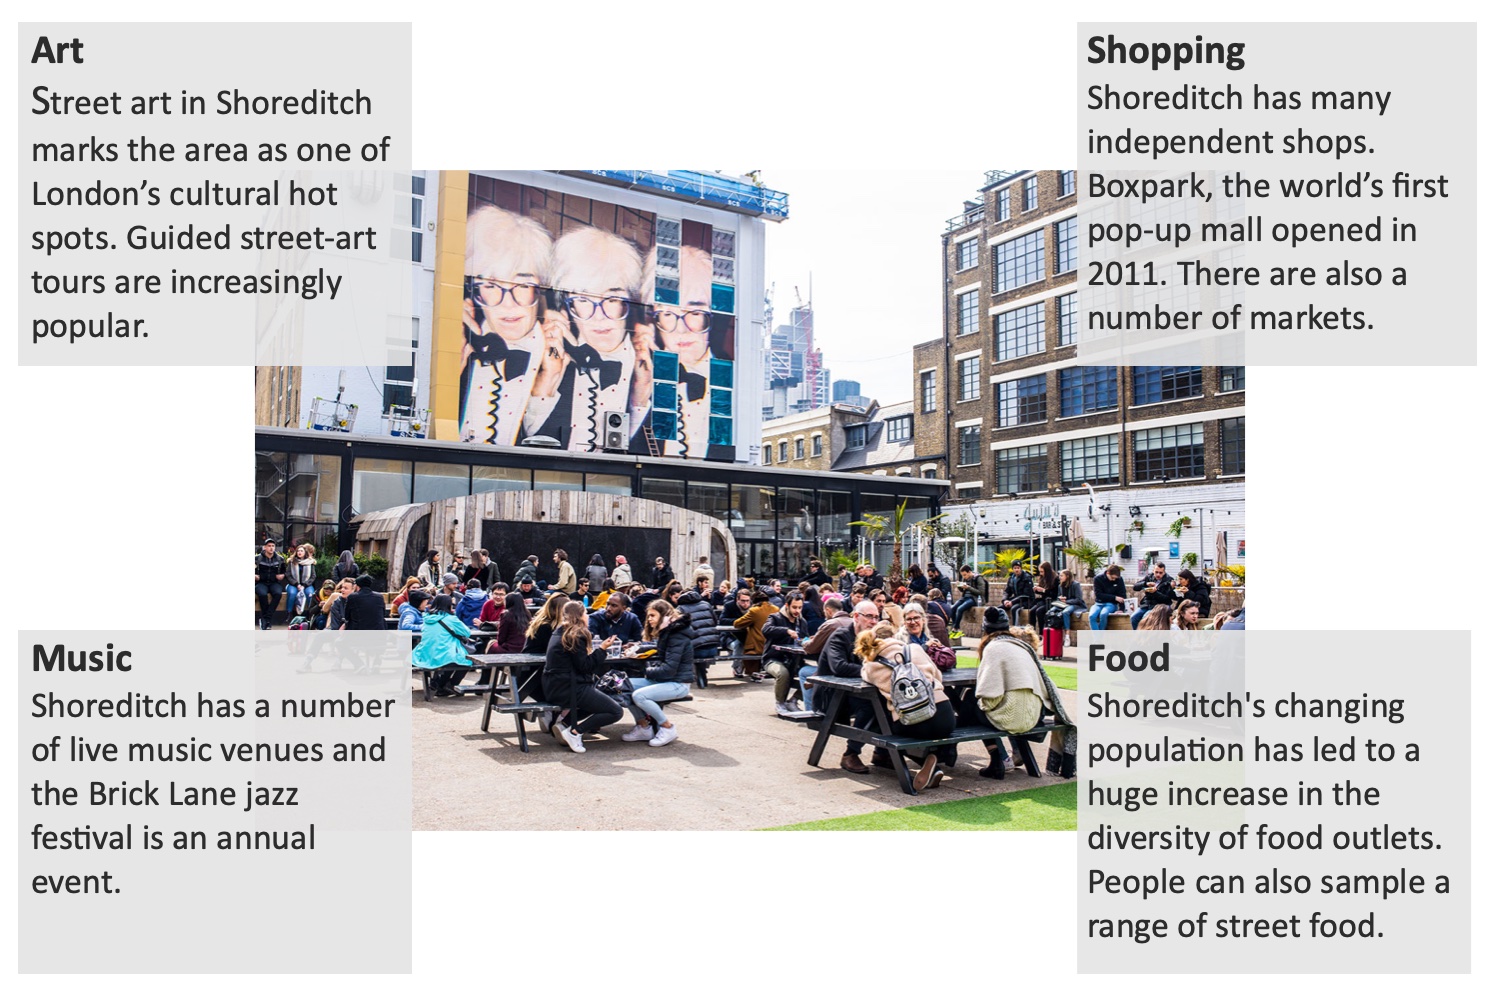 Recreation and Entertainment in Shoreditch